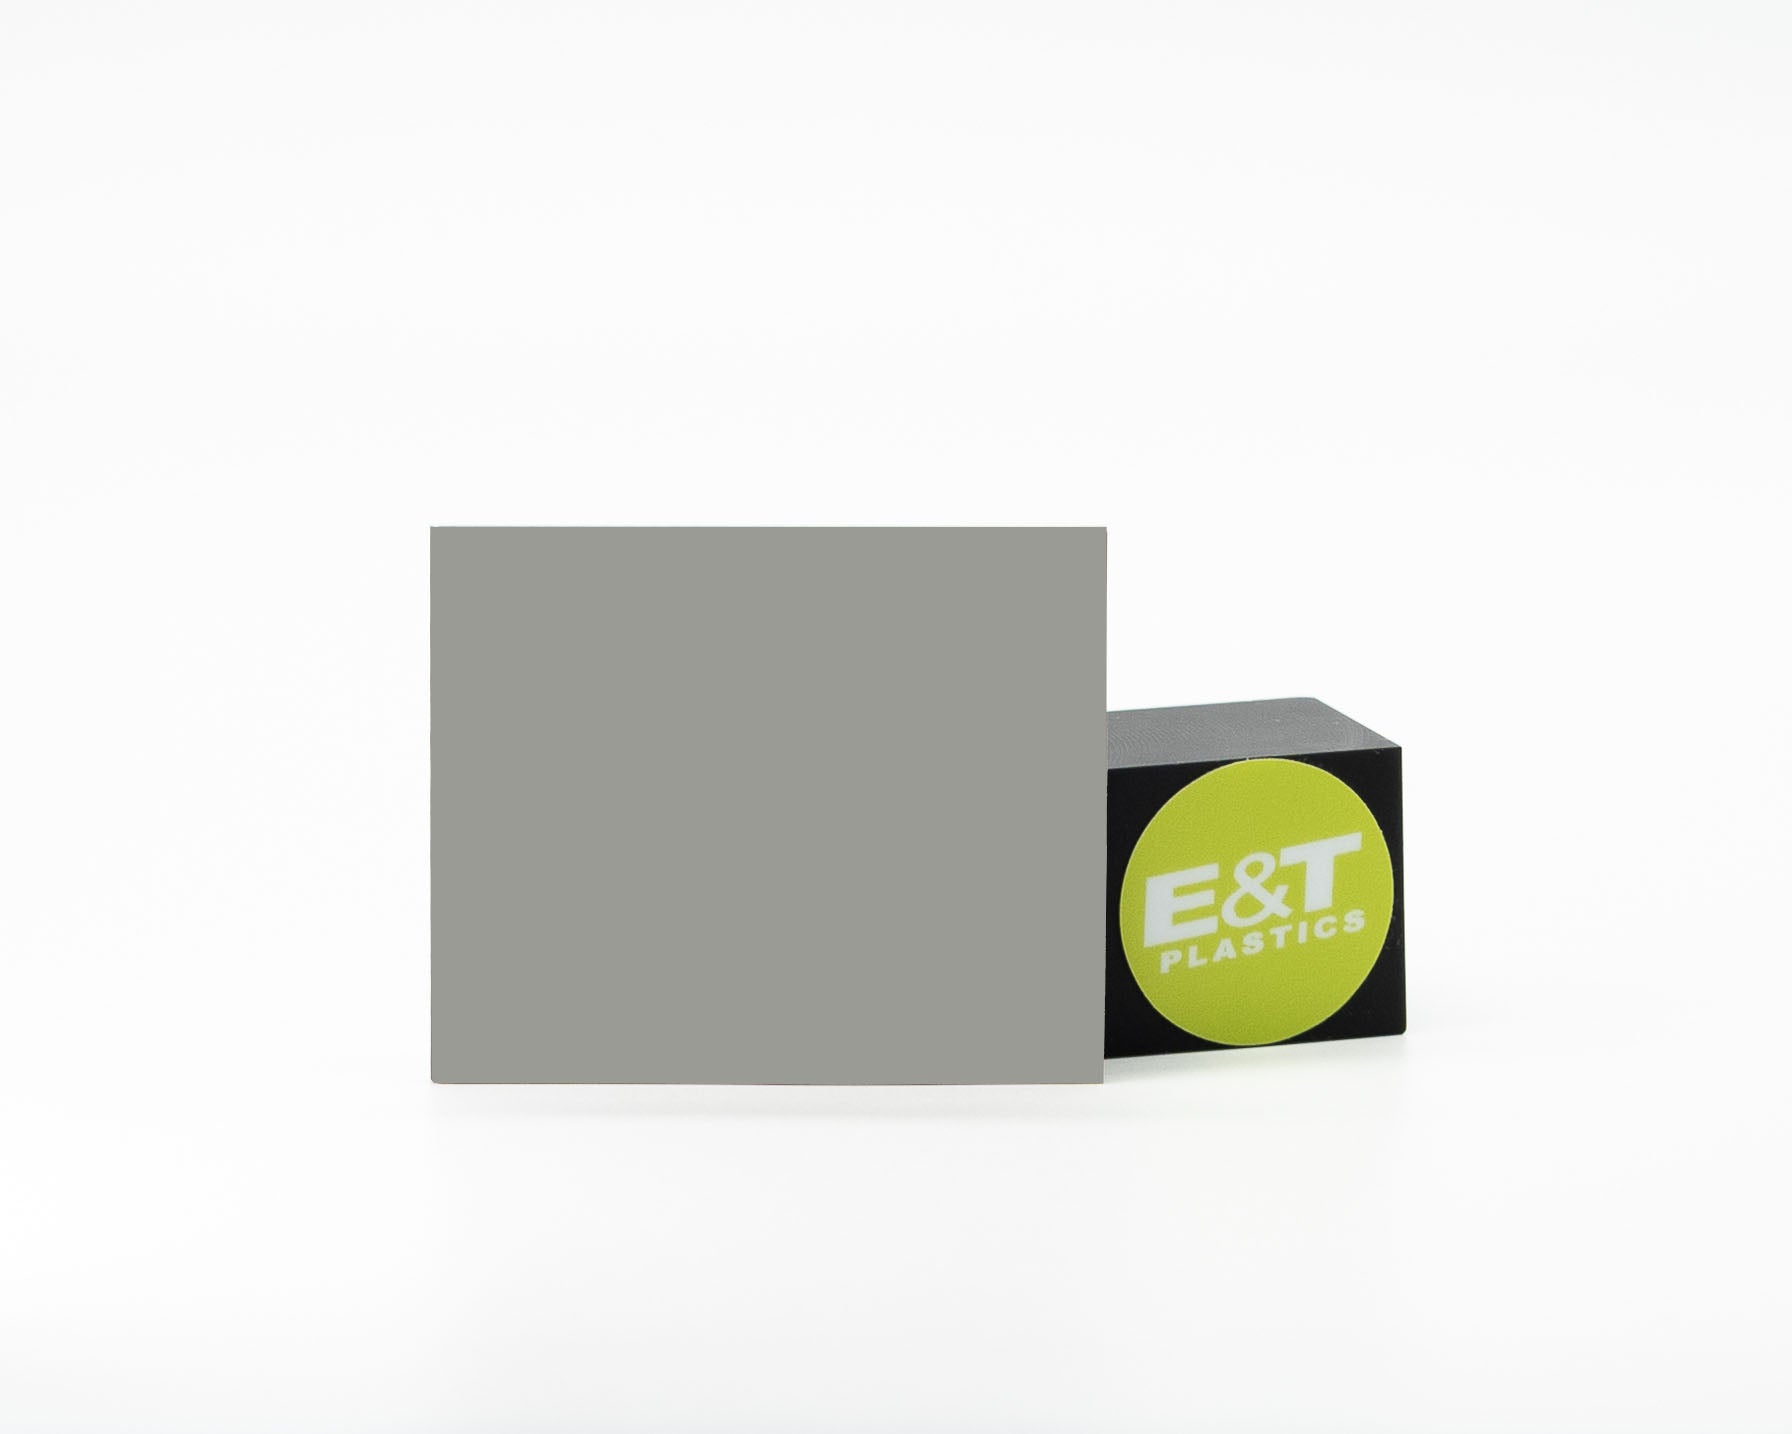 Light Grey Acrylic - Aggresively priced due to overstock